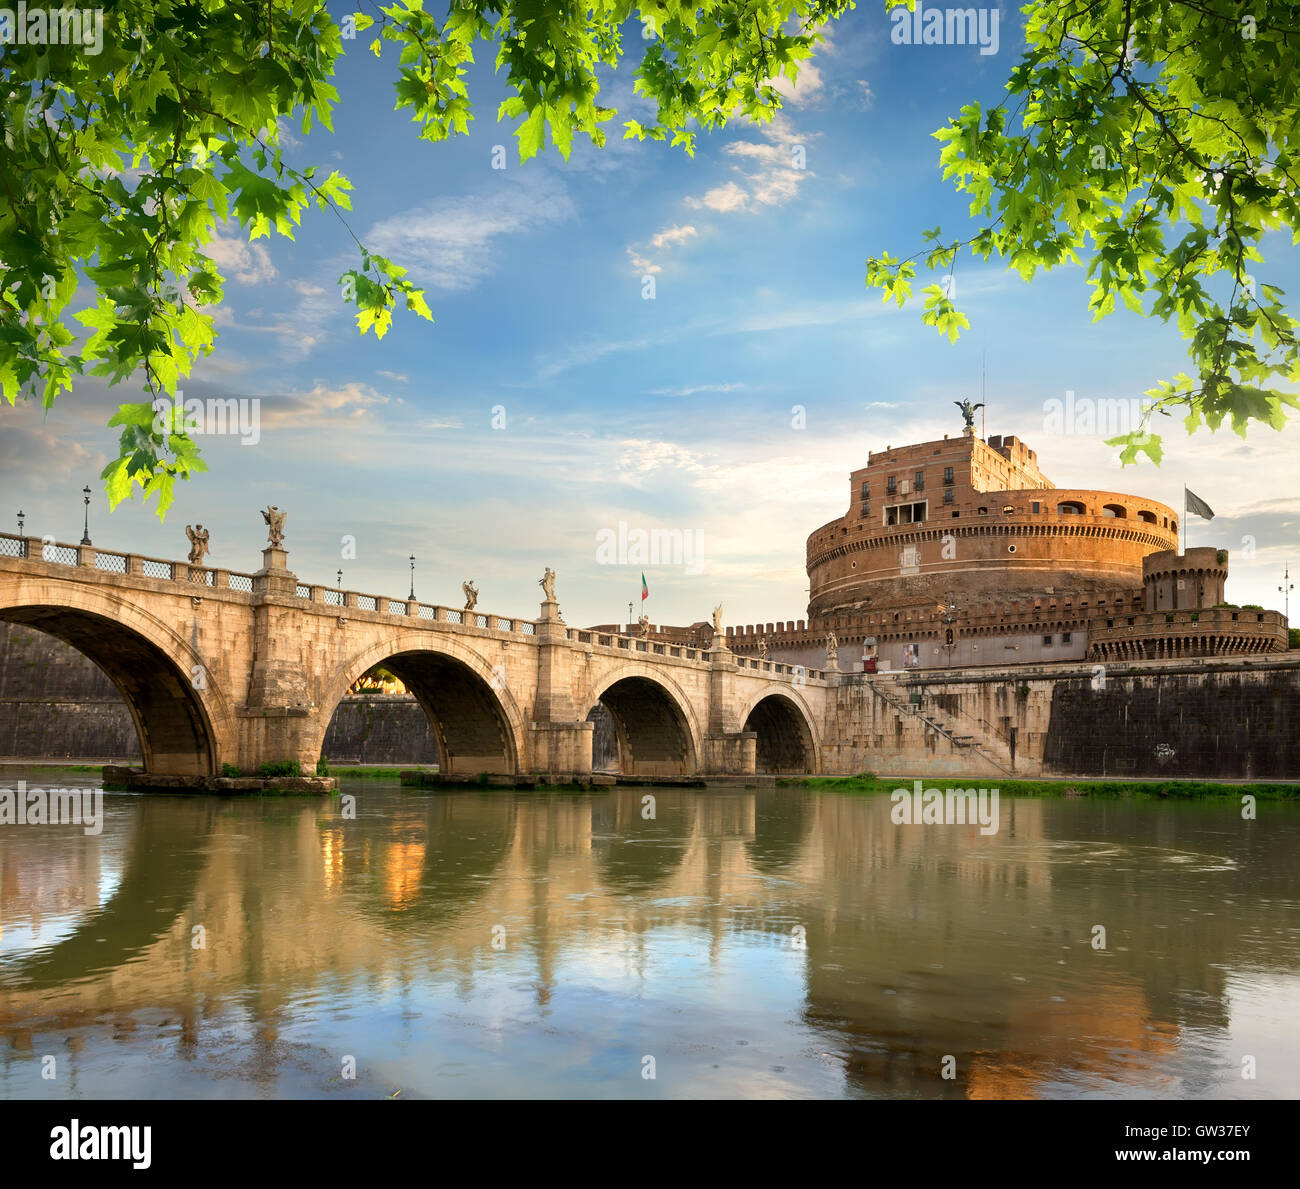 Castle and bridge of Angels in Italy, Rome Stock Photo